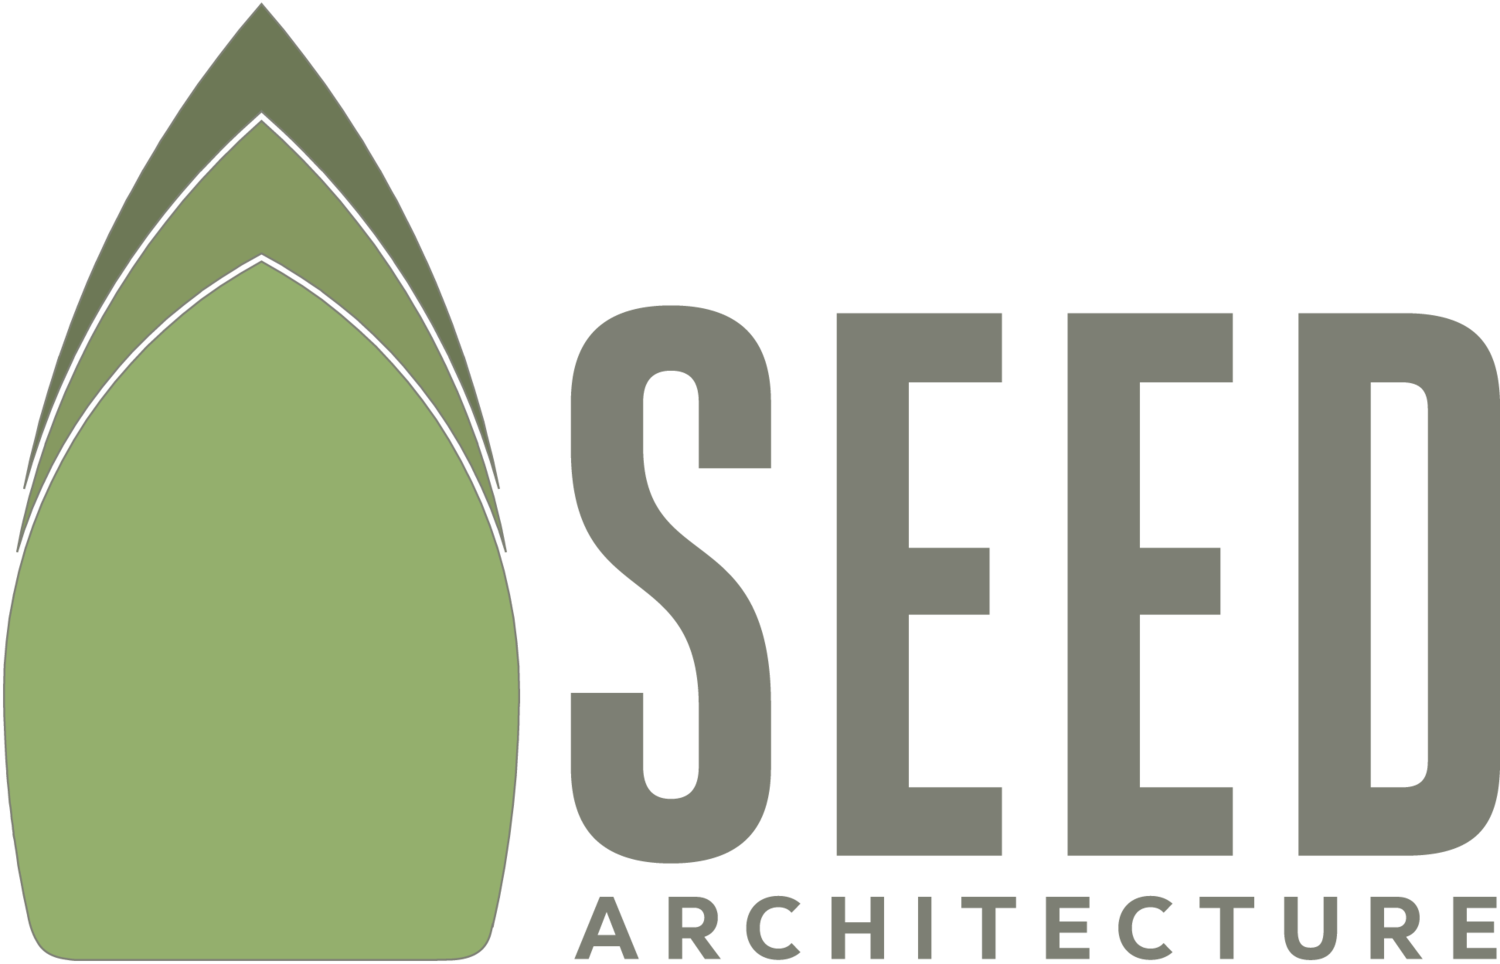 SEED ARCHITECTURE | Columbia, SC | Commercial and Residential Architecture & Planning Firm